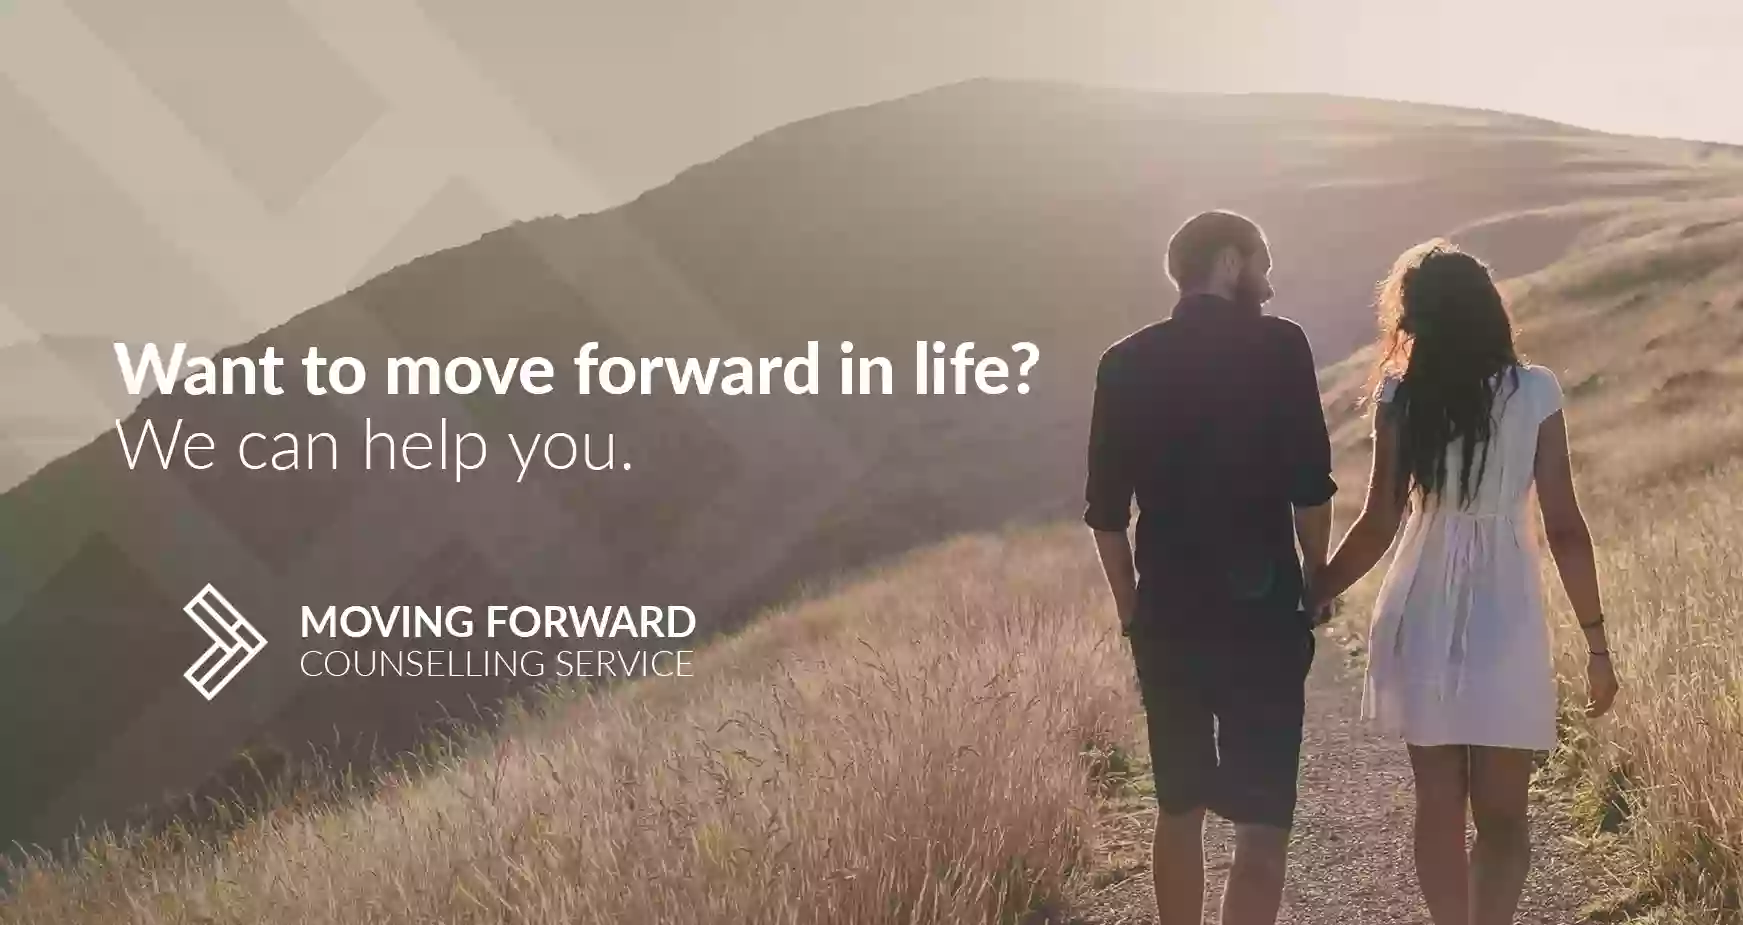 Moving Forward Counselling Services